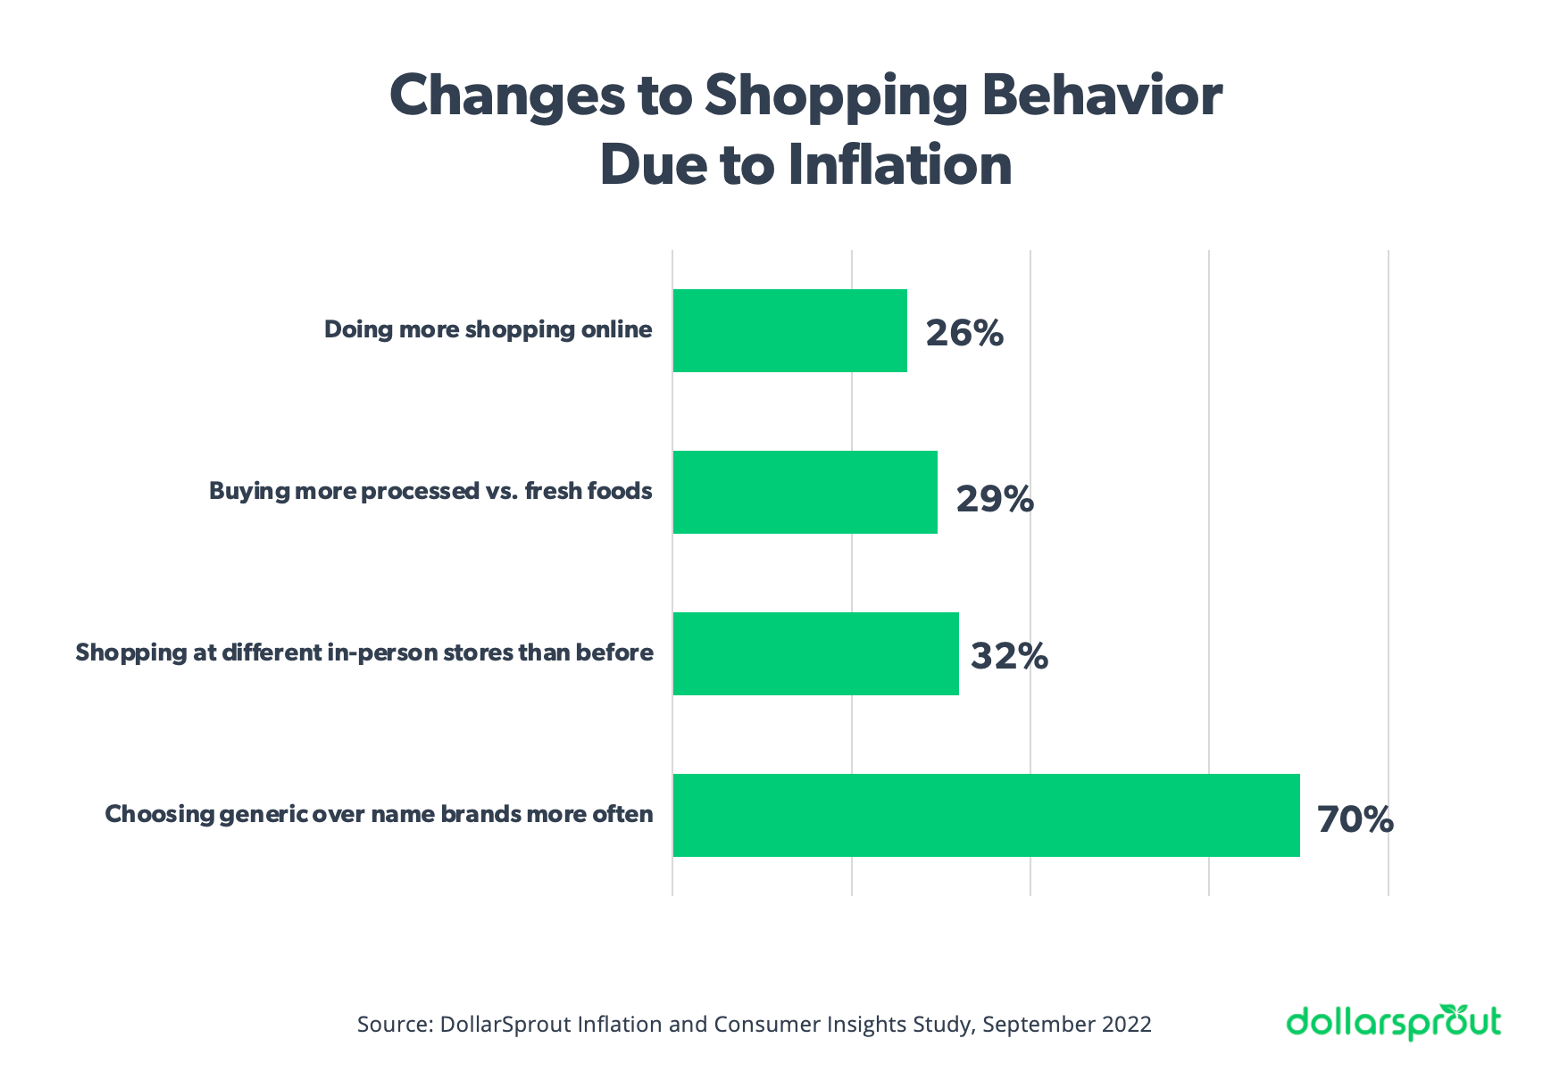 Chart depicting changes to shopping behavior due to inflation, with the most common change being choosing generic brands over store brands (70%).